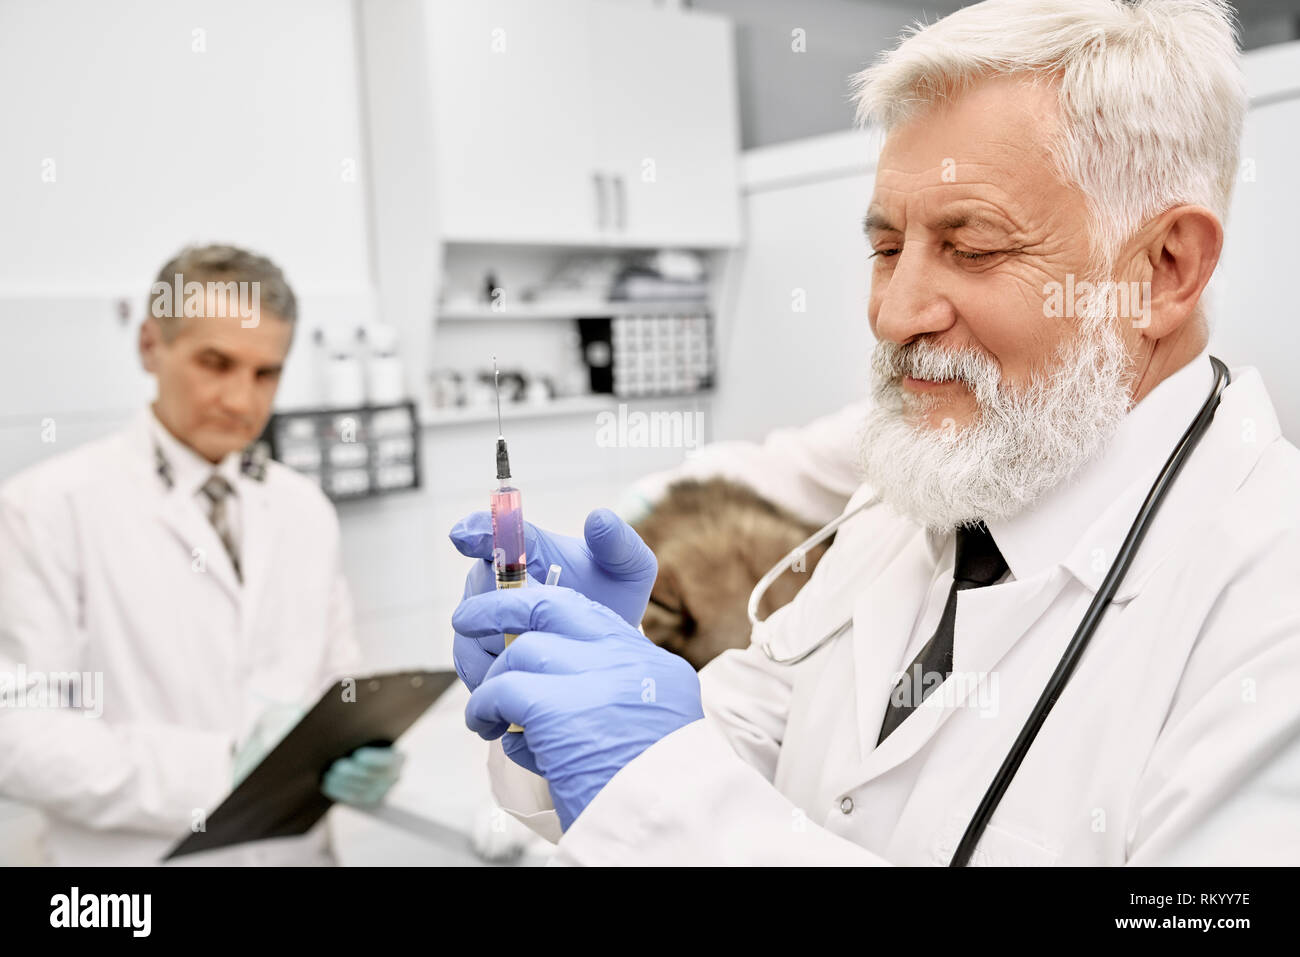 Cheerful elderly veterinarian holding needle for injection. Doctor with gray hair and beard wearing in white medical uniform and blue gloves. Assistant standing near patient, holding folder. Stock Photo